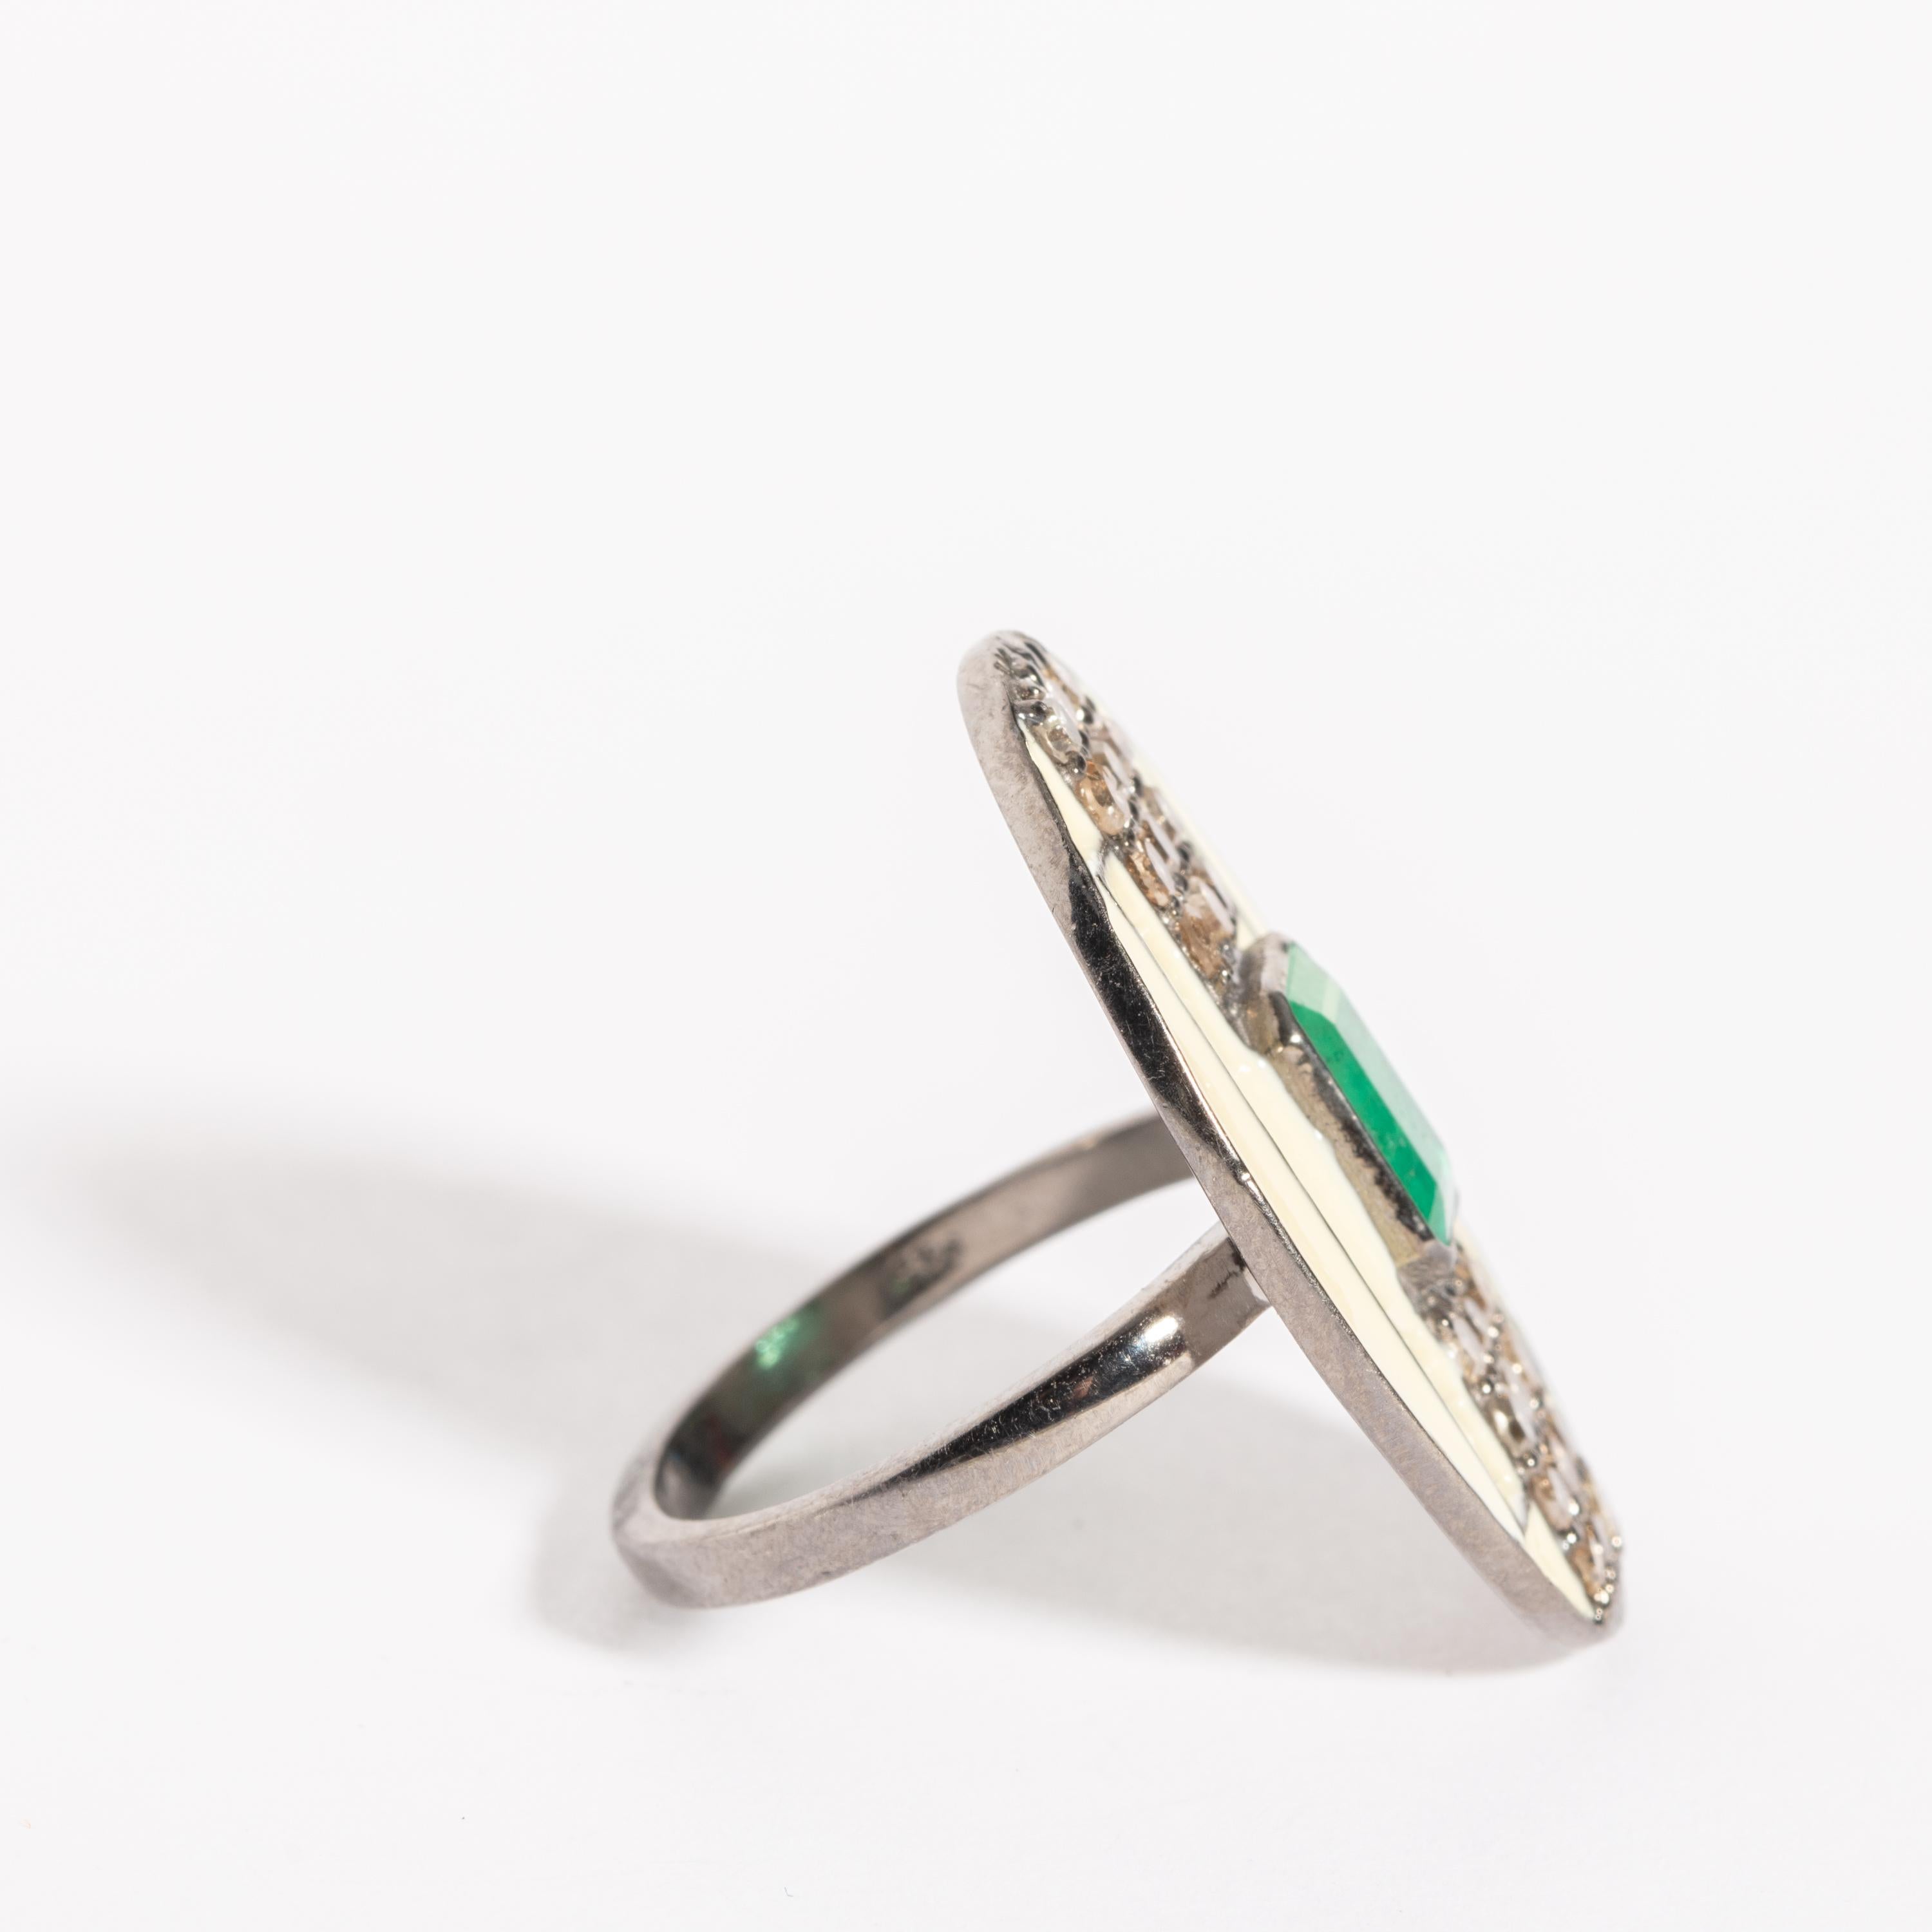 In an Art Deco design, a white enamel and sterling silver ring with an emerald-cut center stone emerald  with brilliant-cut diamonds.  Weight of diamonds is .81 carats, emerald is 1.15 carats.  Ring size is 7.25.